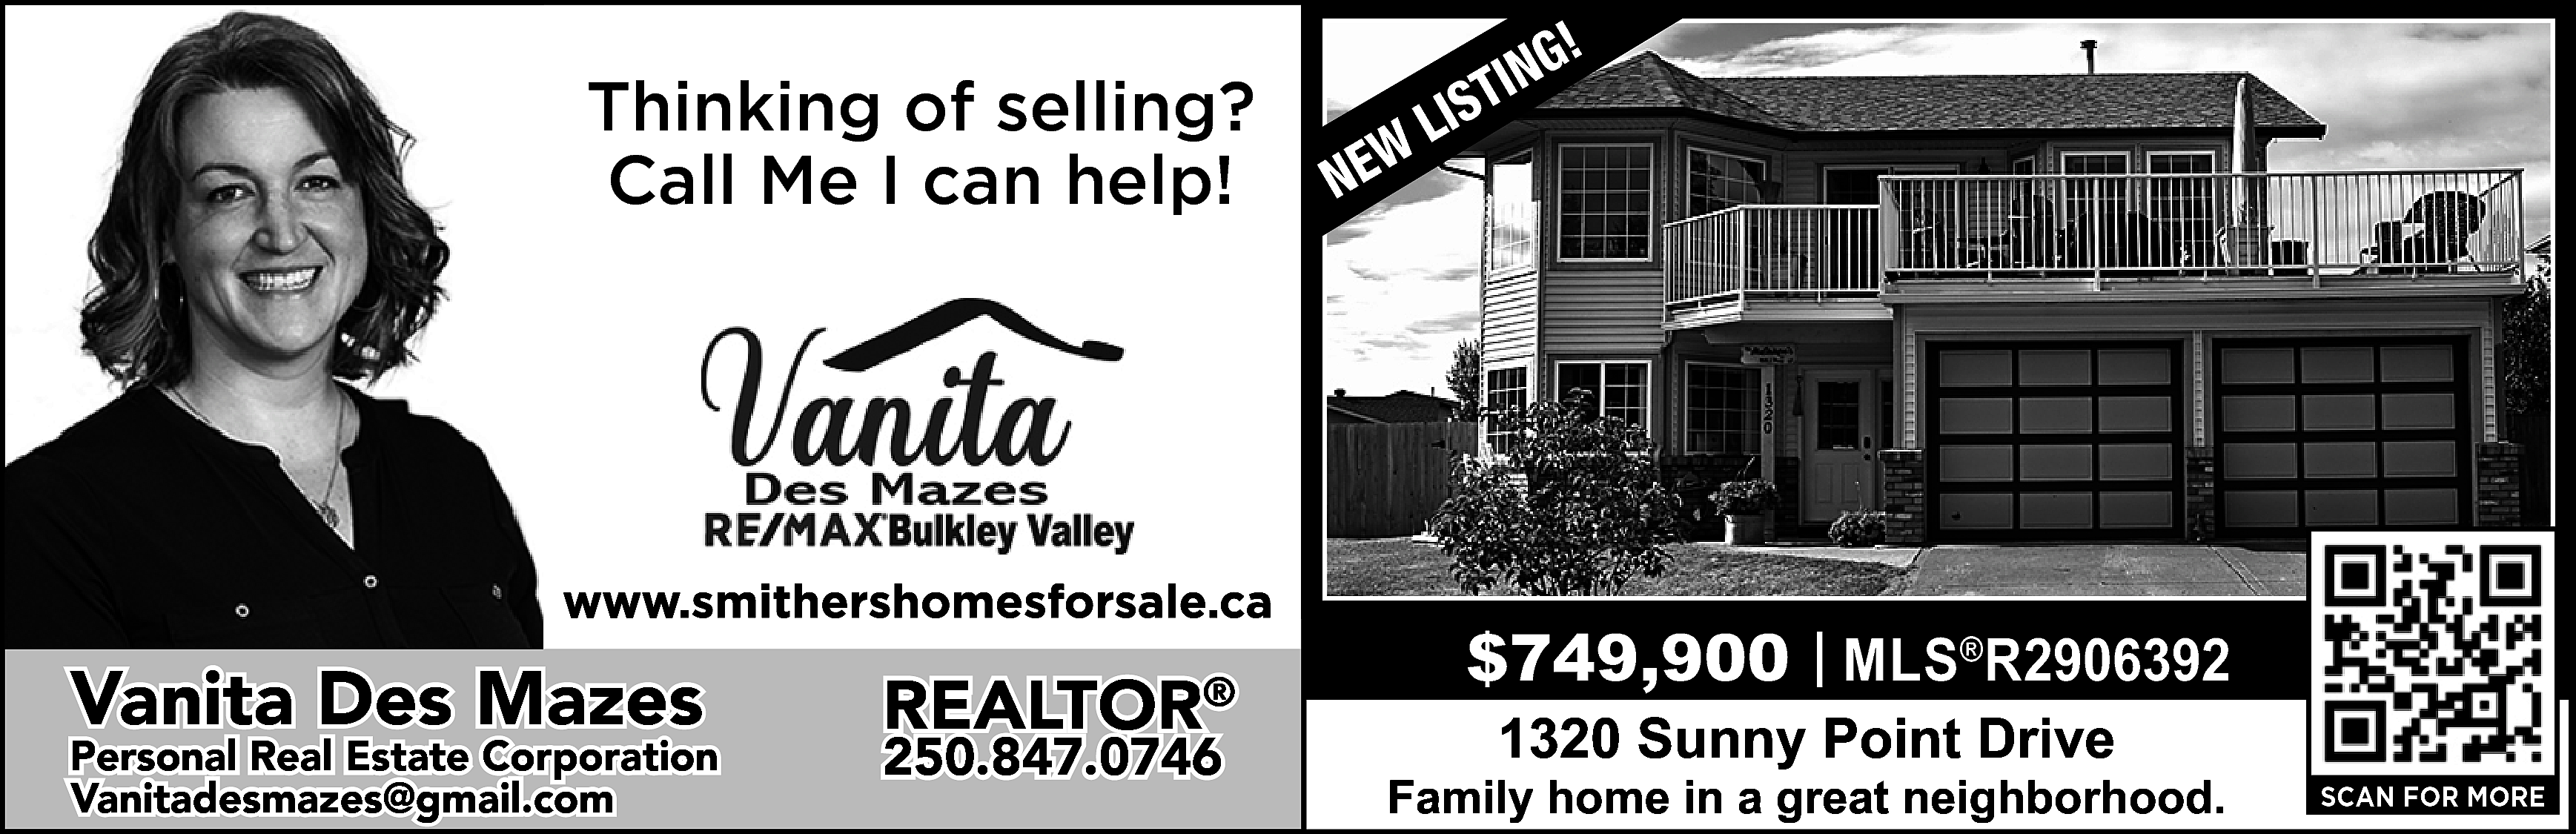 Thinking of selling? <br>Call Me  Thinking of selling?  Call Me I can help!    https://www.smithershomesforsale.ca/    Vanita Des Mazes    Personal Real Estate Corporation  vanitadesmazes@gmail.com  Vanitadesmazes@gmail.com    REALTOR    ®    250.847.0746    W  NE    !  ING  T  S  LI    $749,900 | MLS®R2906392  1320 Sunny Point Drive    Family home in a great neighborhood.    SCAN FOR MORE    